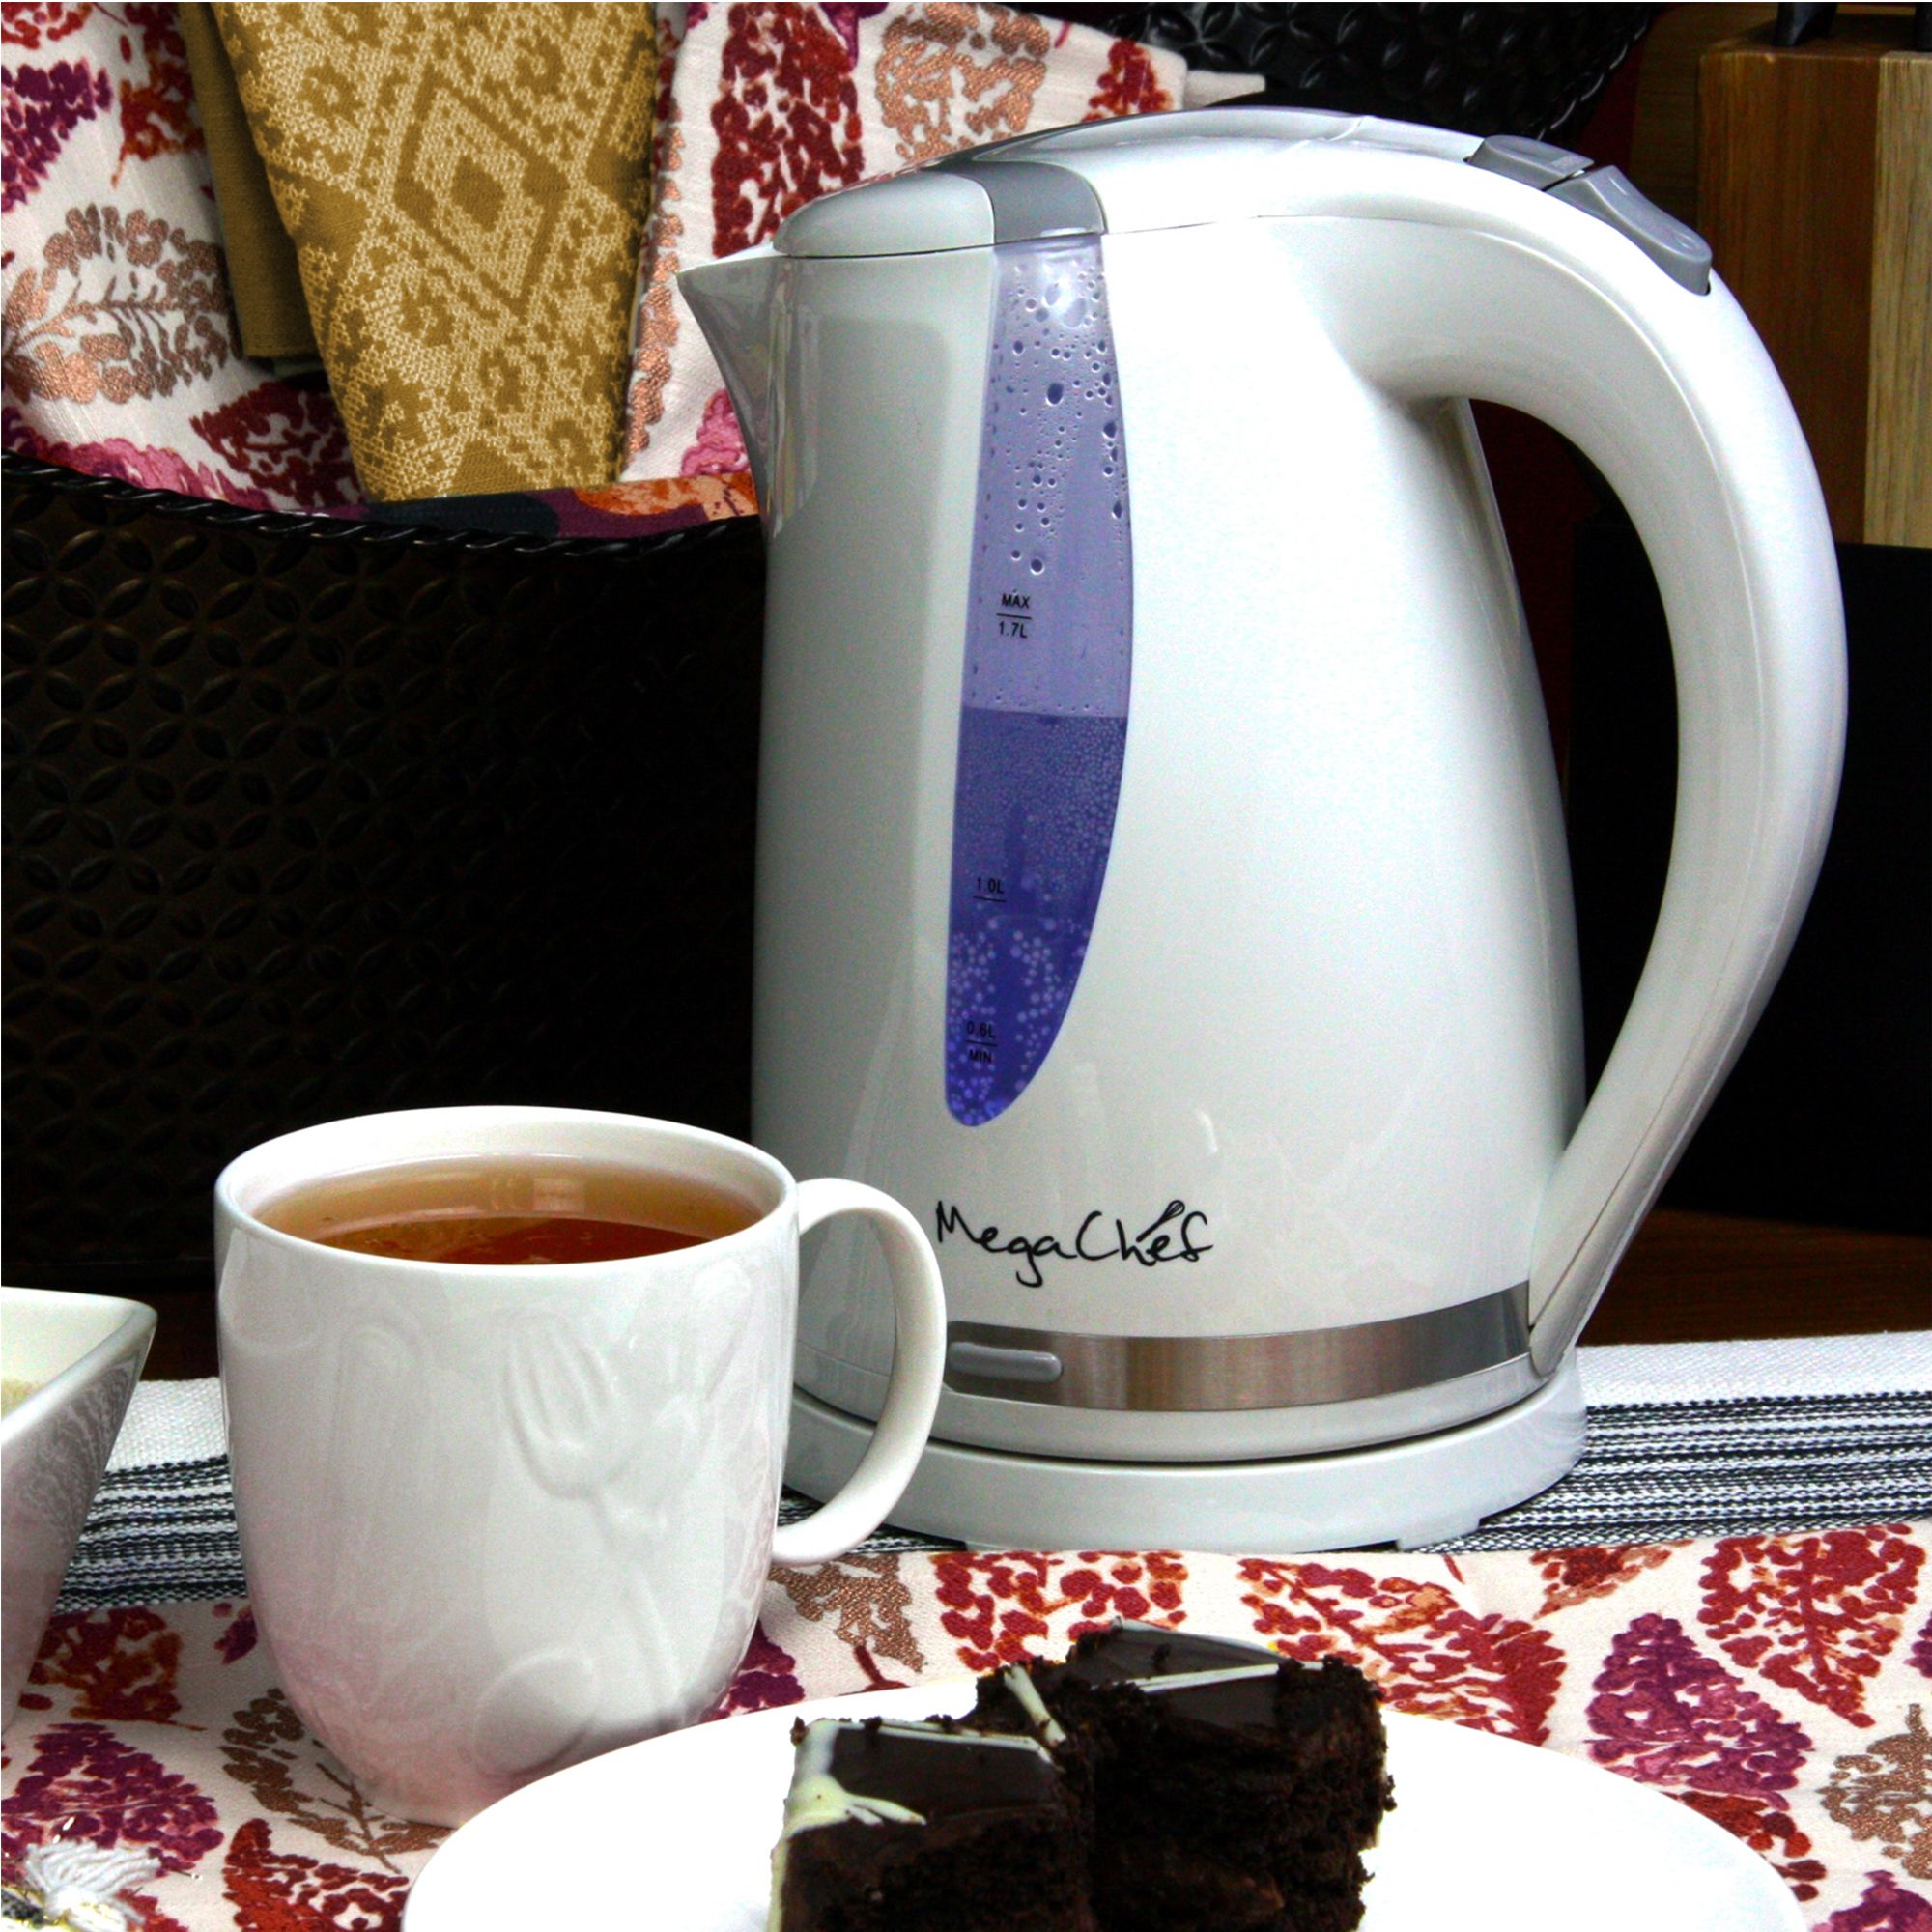 Reviews for MegaChef 1.8 l Glass and Stainless Steel Electric Tea Kettle